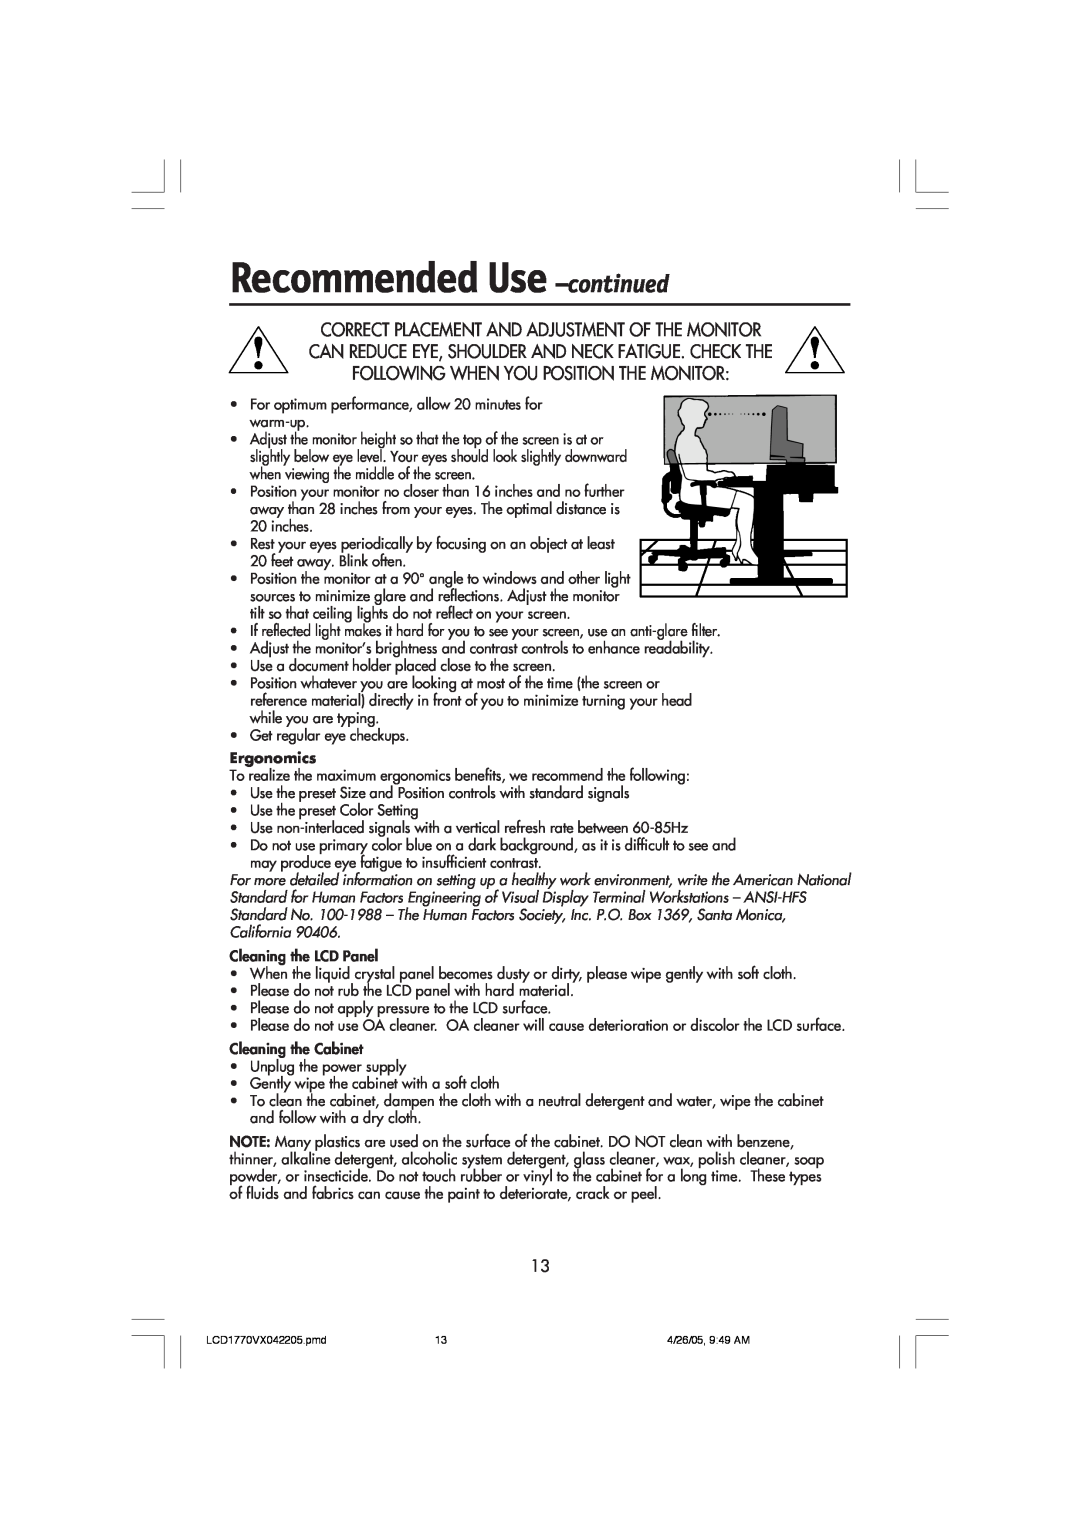 NEC LCD1770VX user manual Recommended Use -continued, Correct Placement And Adjustment Of The Monitor, Ergonomics 